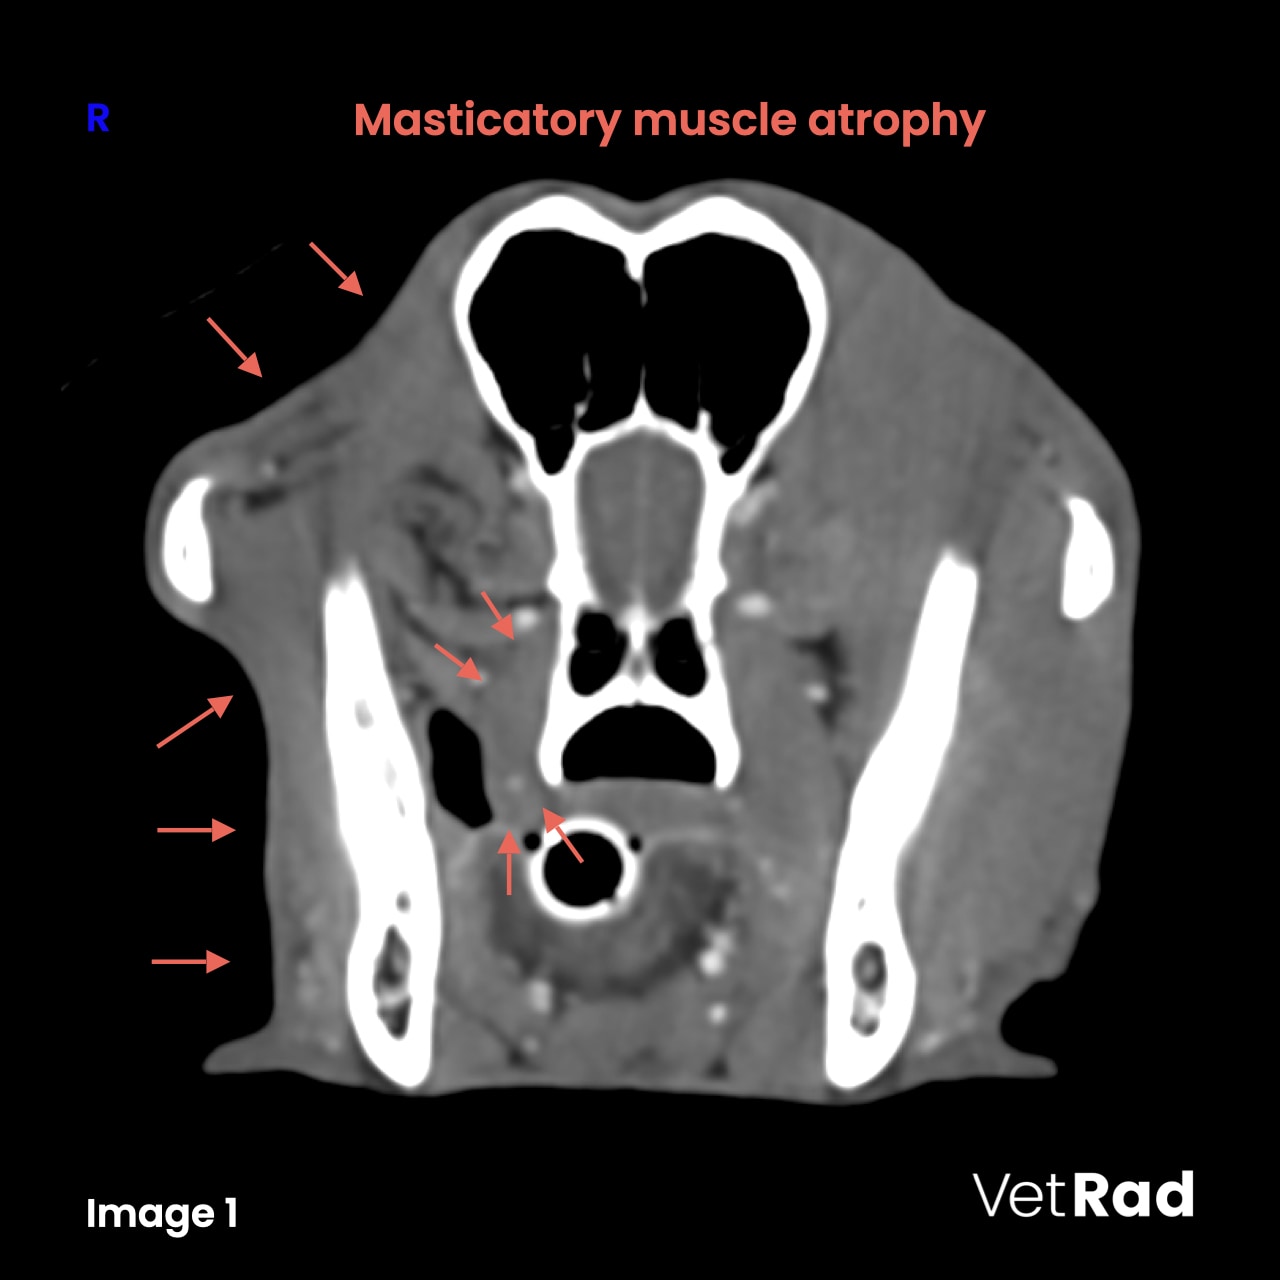 A moderate reduction in size of all right masticatory muscles (M. temporalis, M. masseter, M. pterygoideus medialis et lateralis and M. digastricus) is evident.